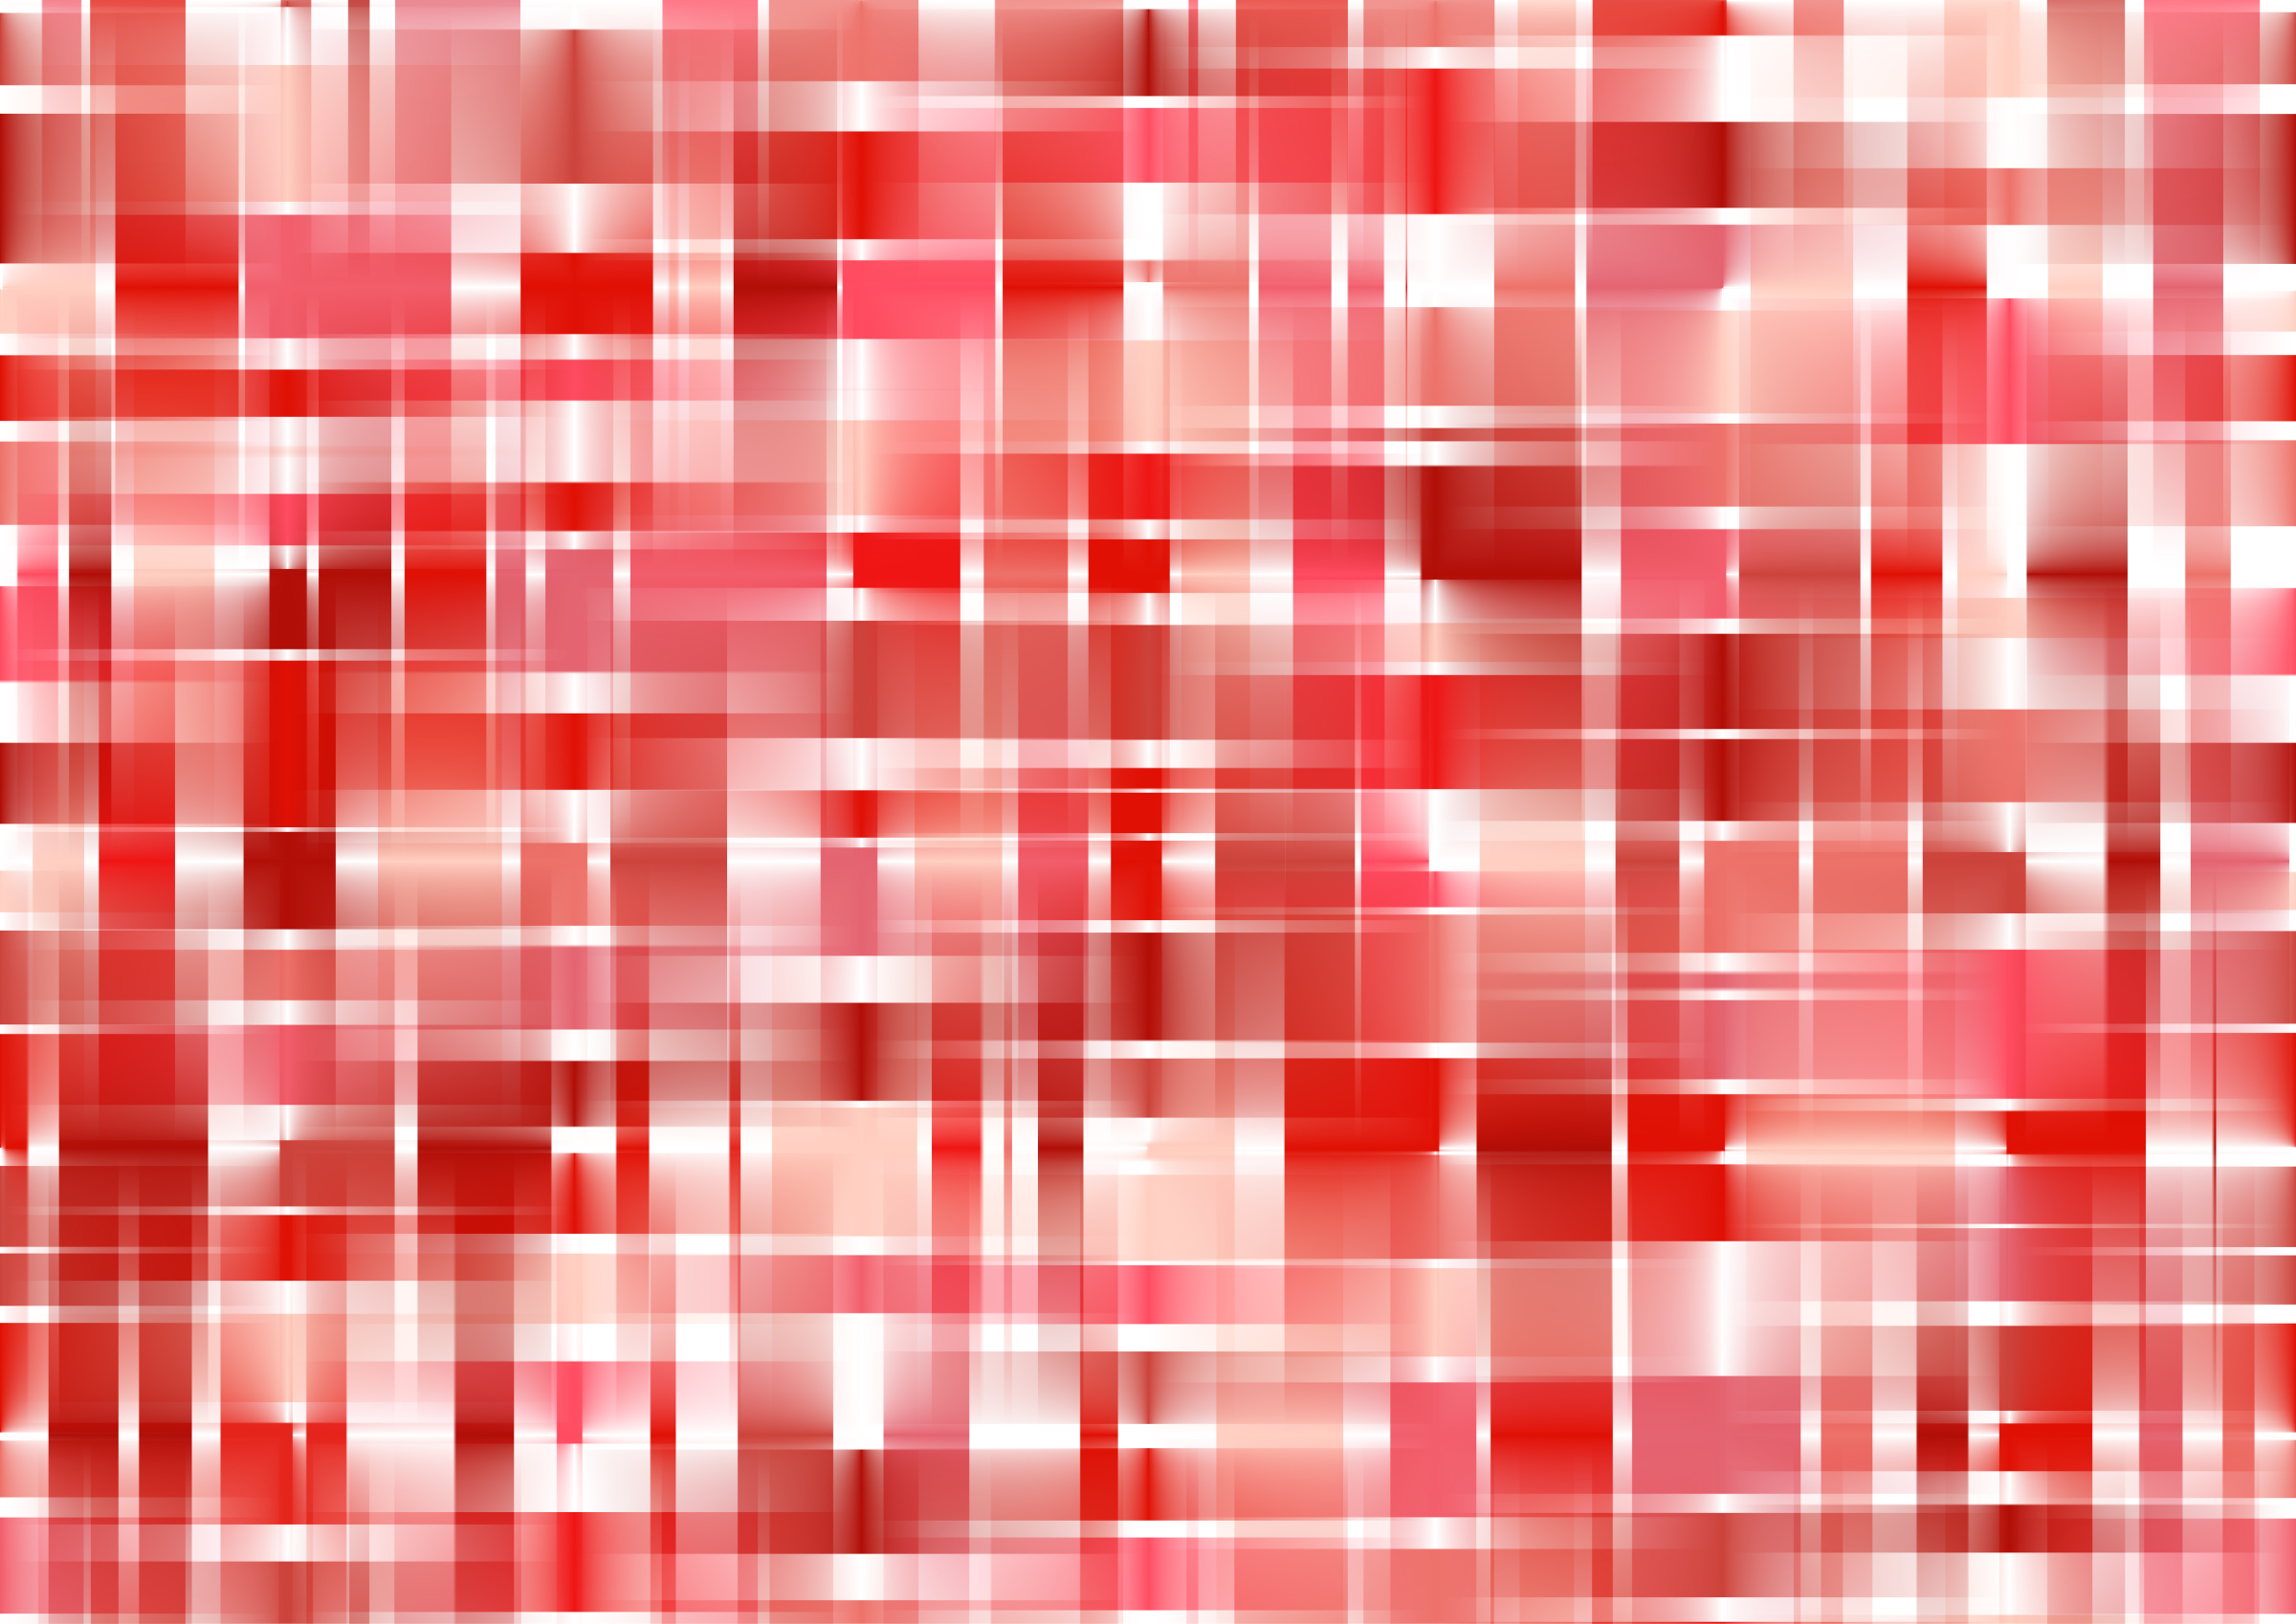 Abstract Digital Art Red 2400x1698